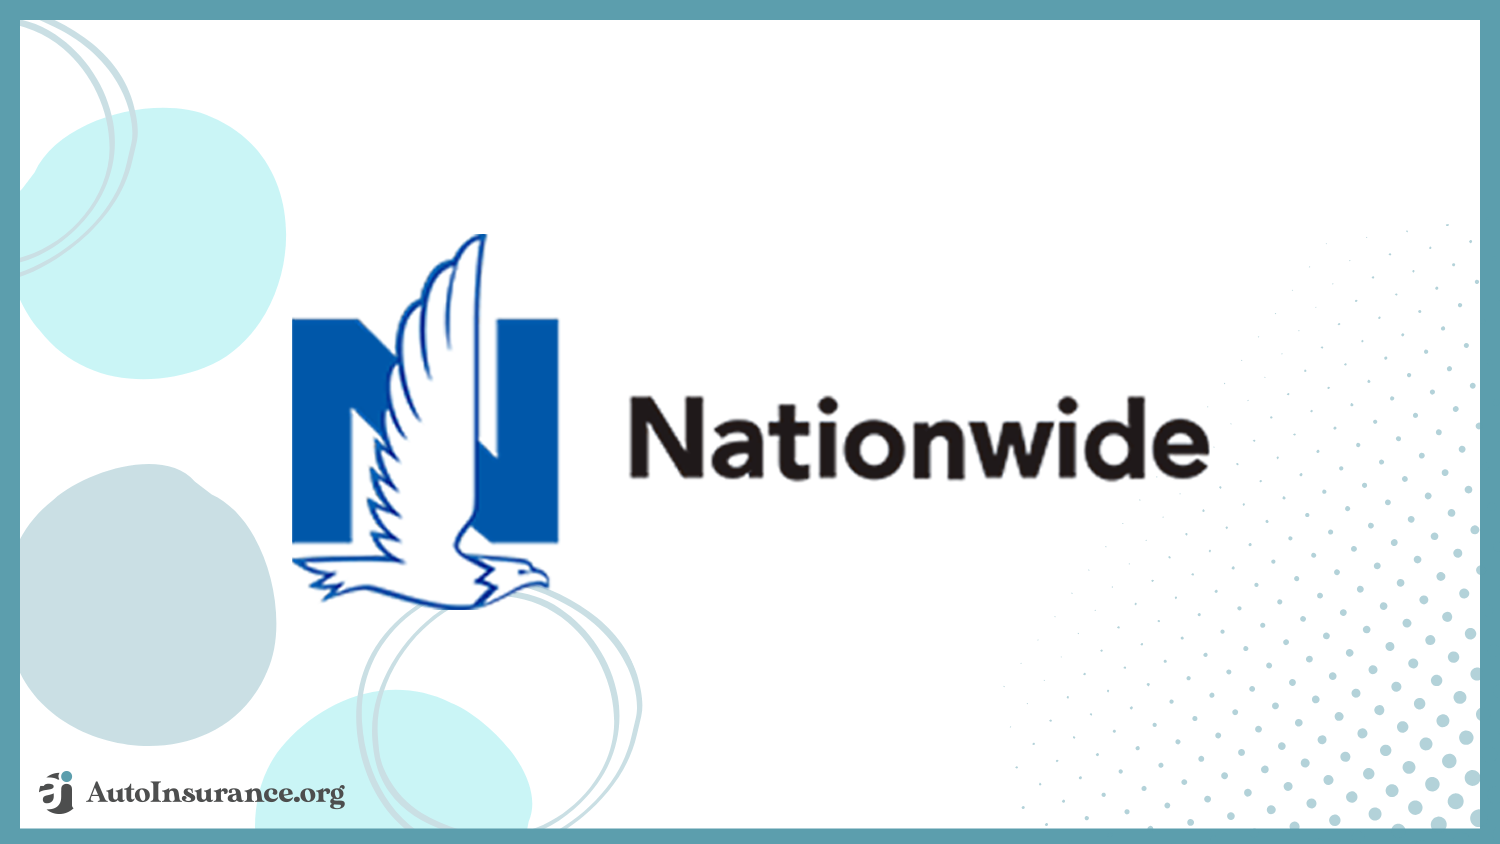 Nationwide: Best Auto Insurance for Turbo Cars